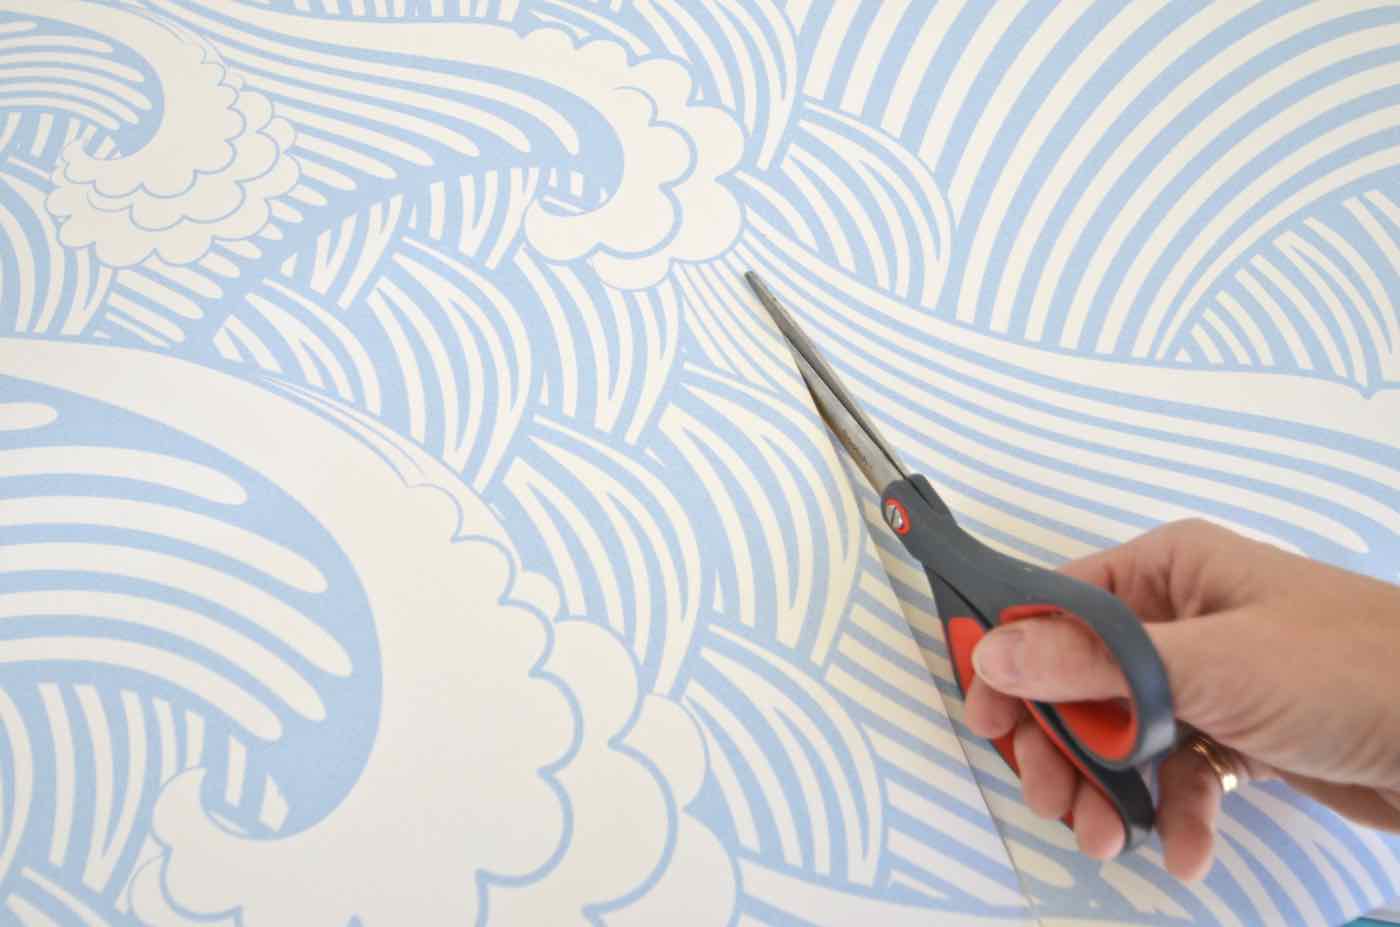 How to apply peel and stick removable wallpaper.